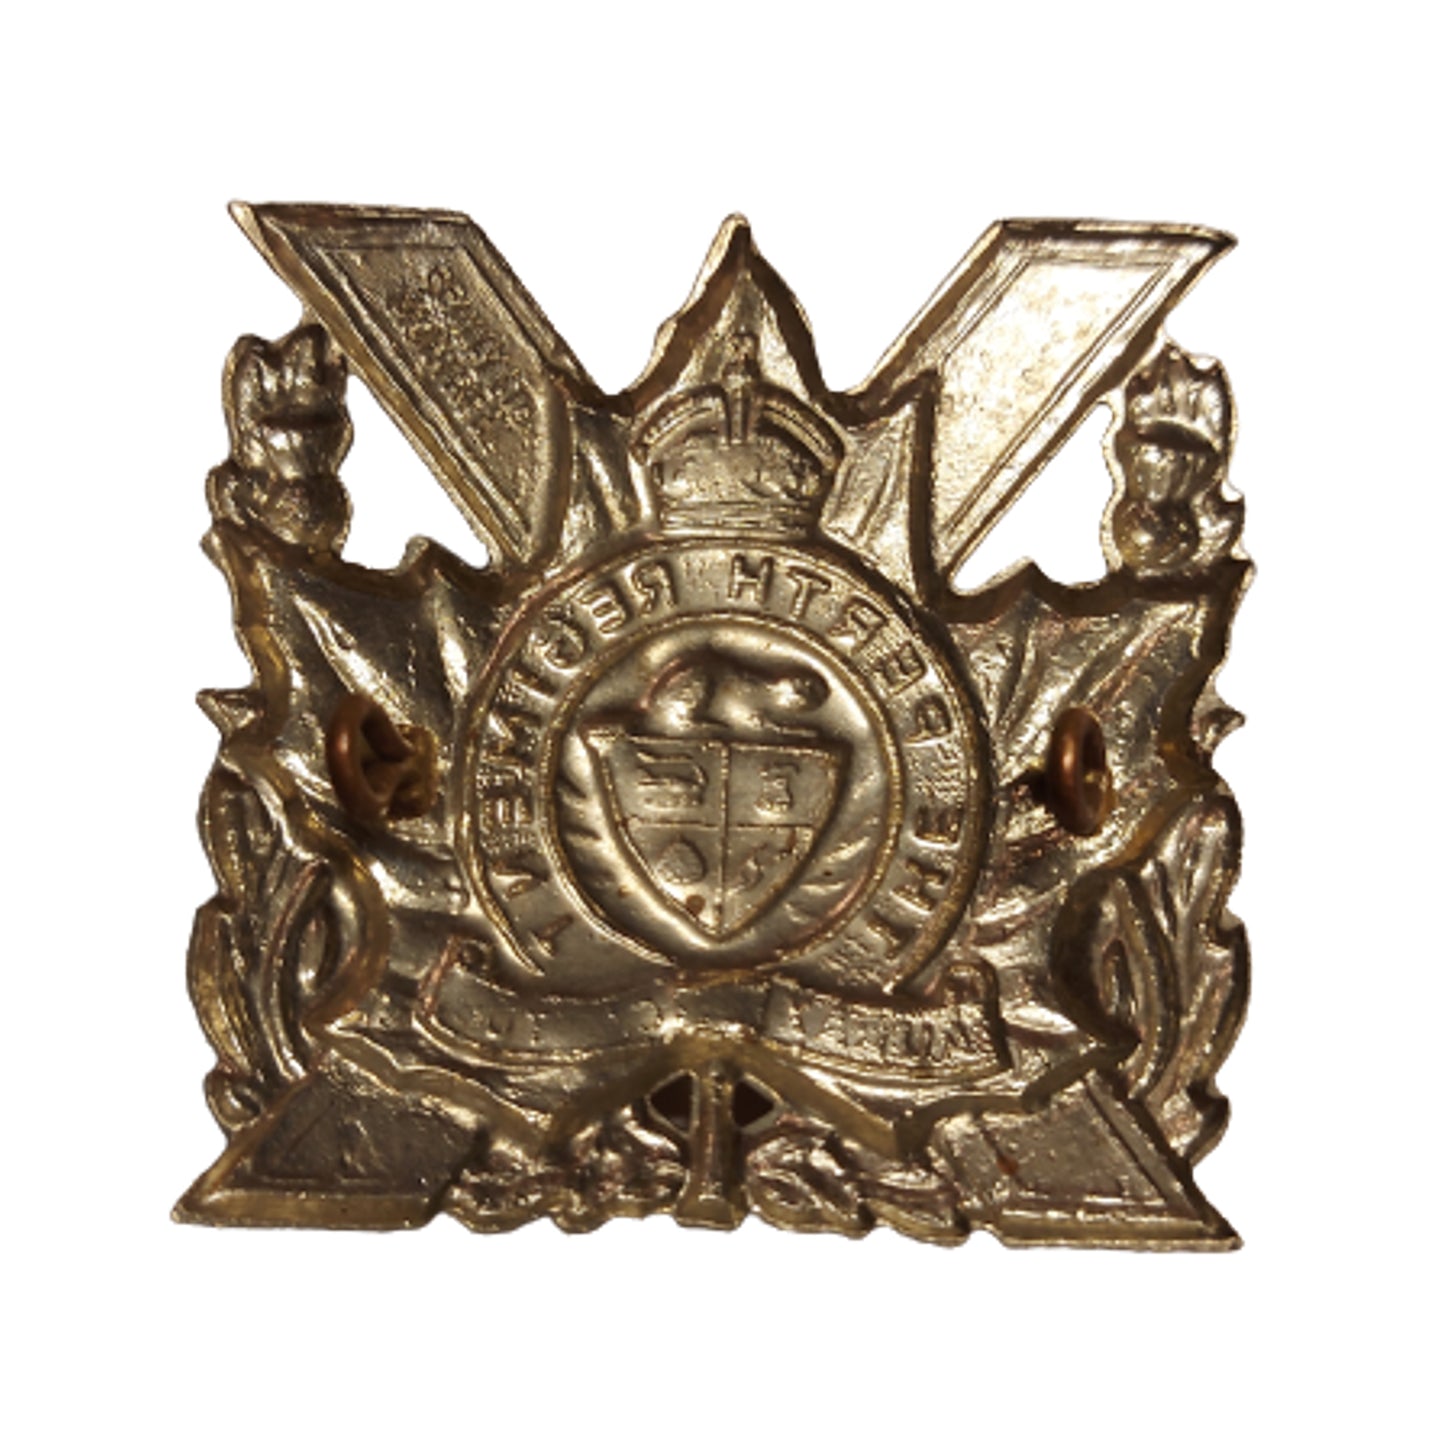 1948 The Perth Regiment Cap Badge - Scully Monteal